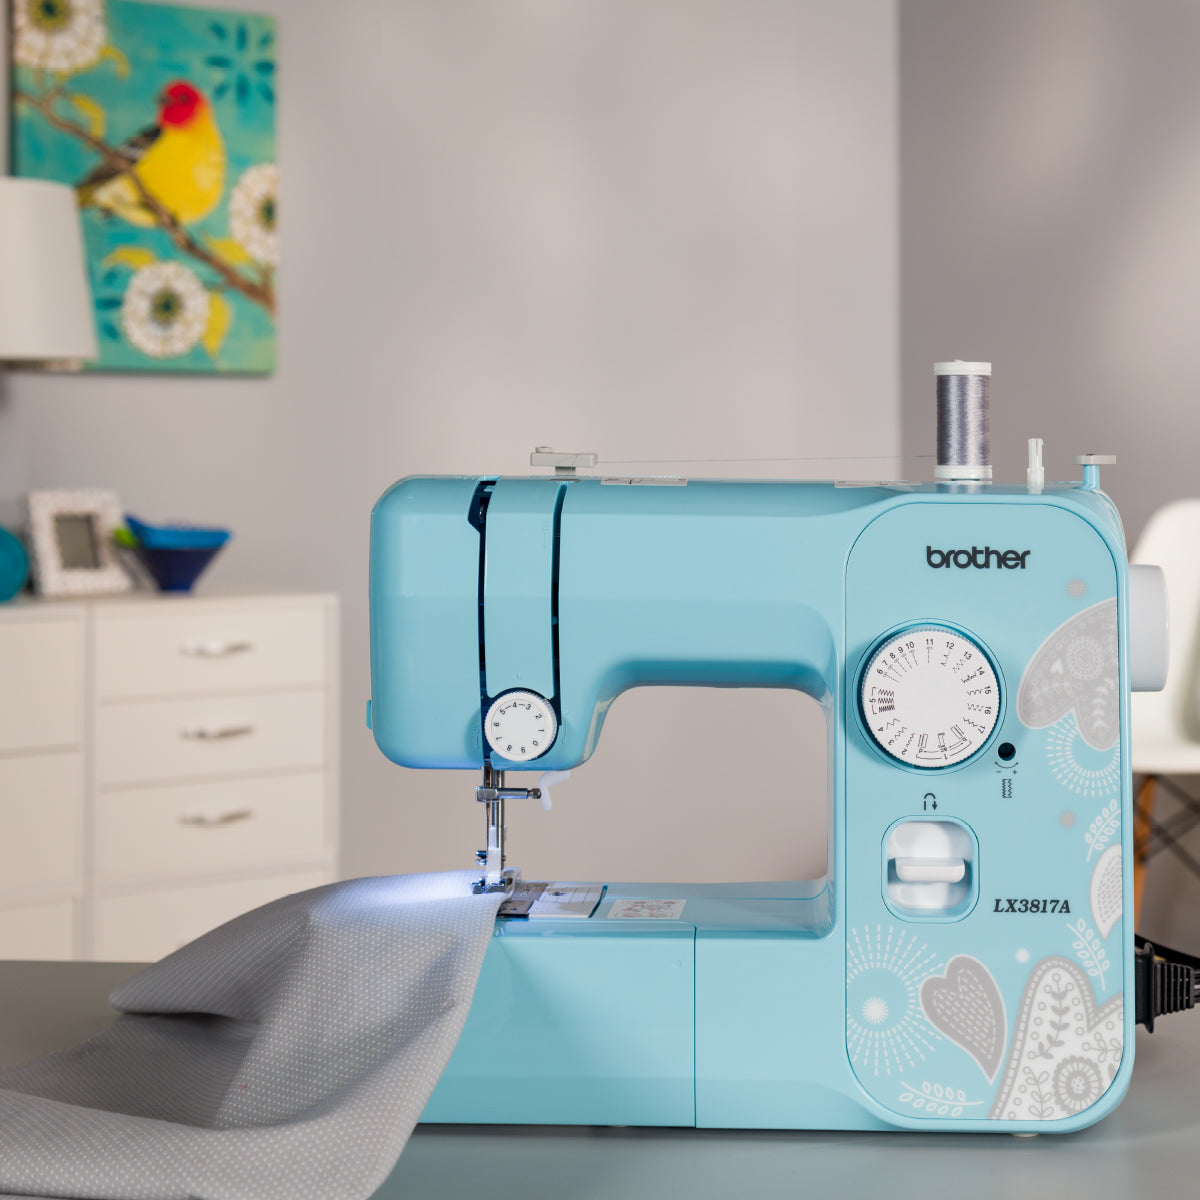 Brother Sewing Machine Jam Resistant Stitch Full-Size-Sewing Machines & Sergers-AULEY